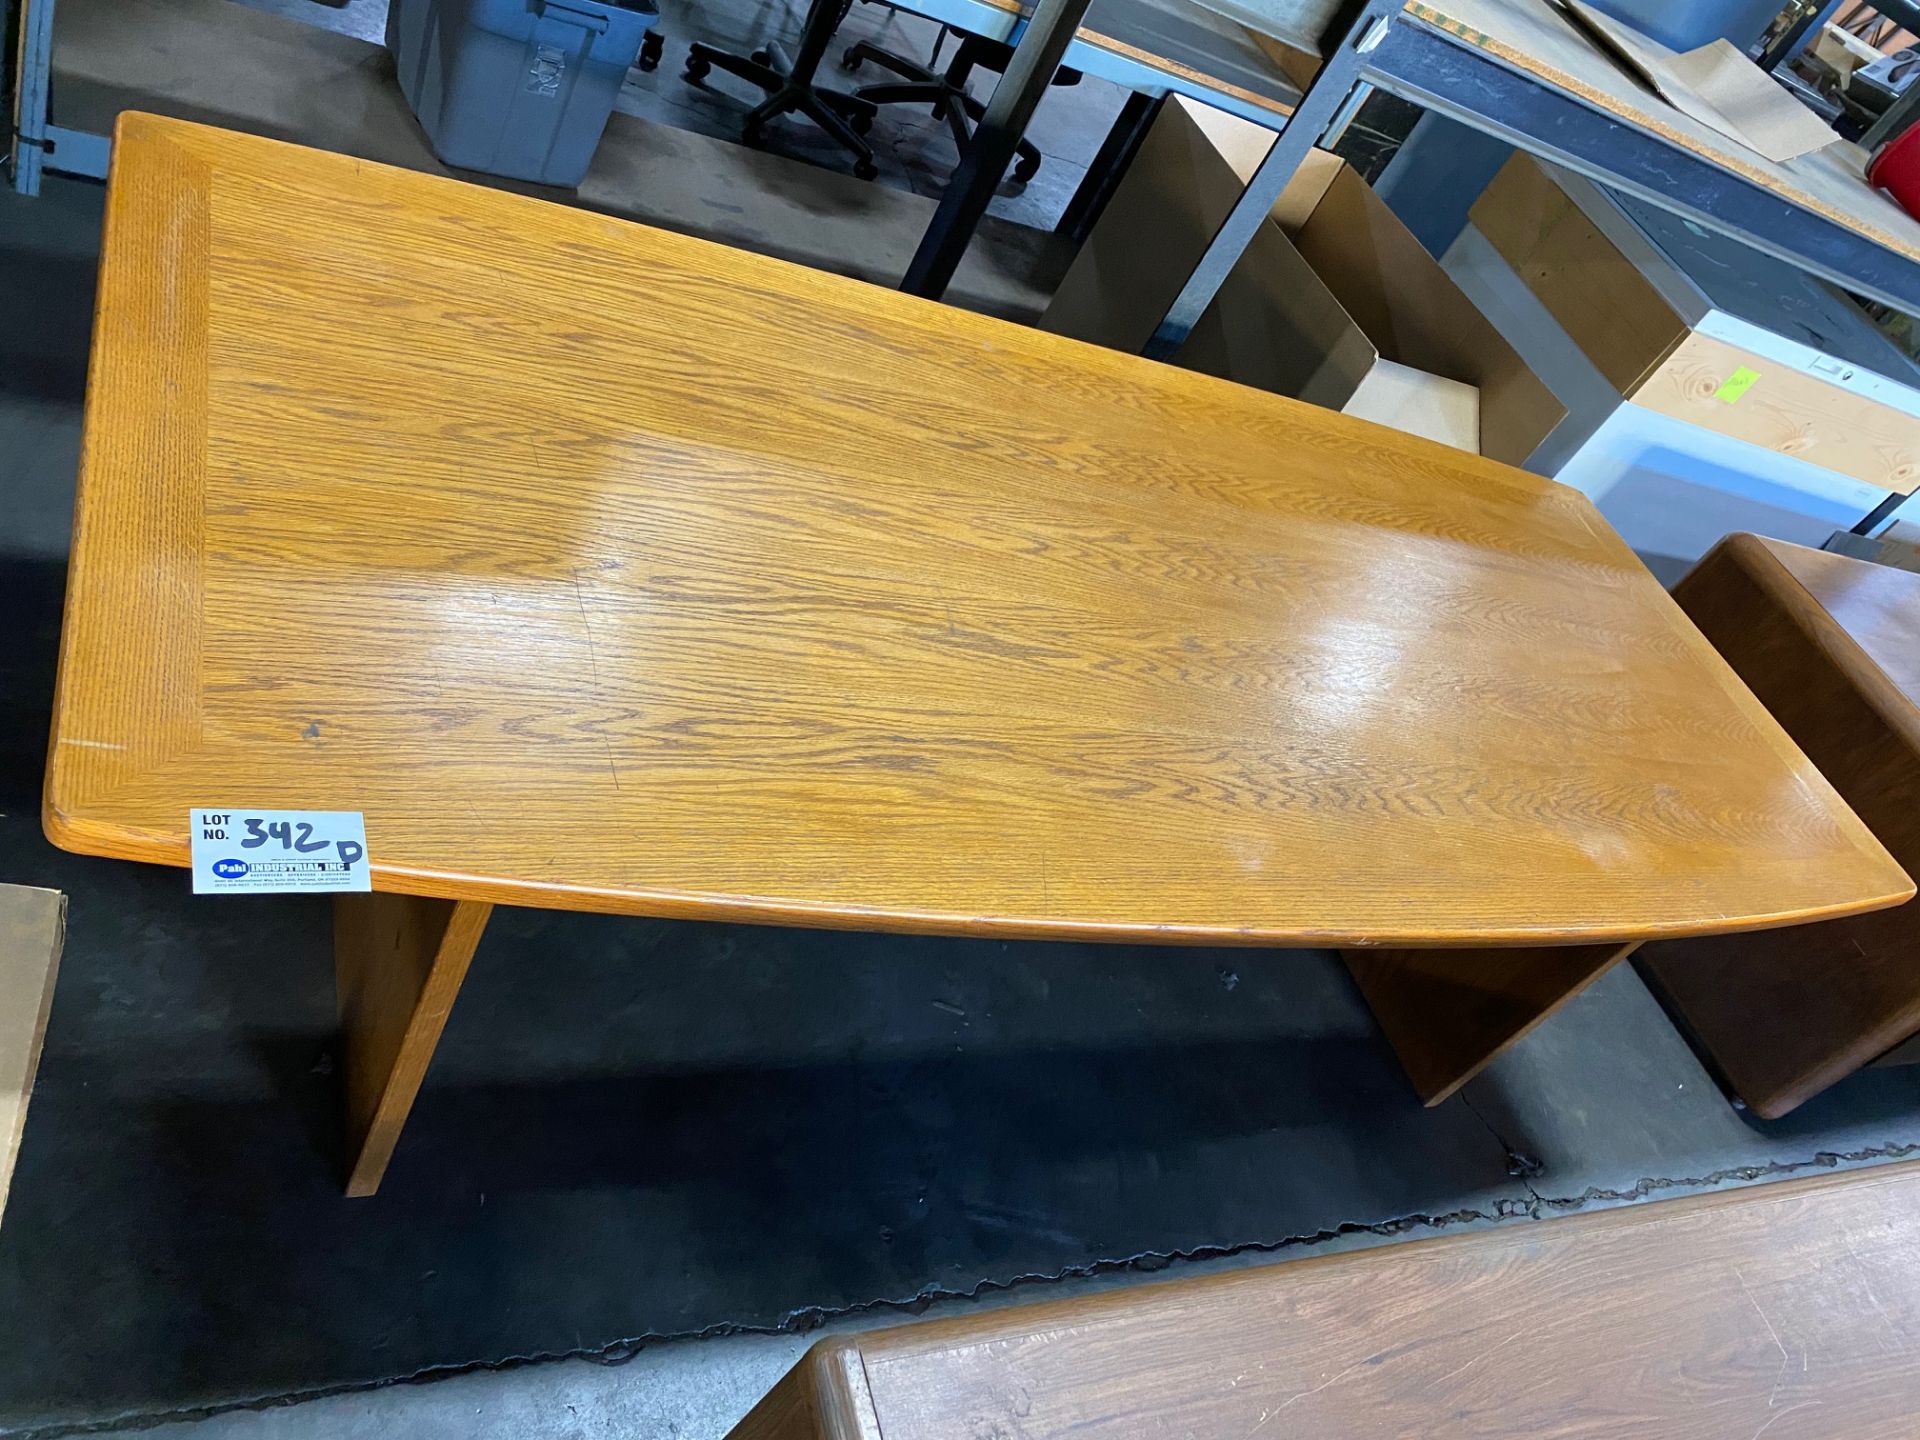 Conference Table 93"" x 41""